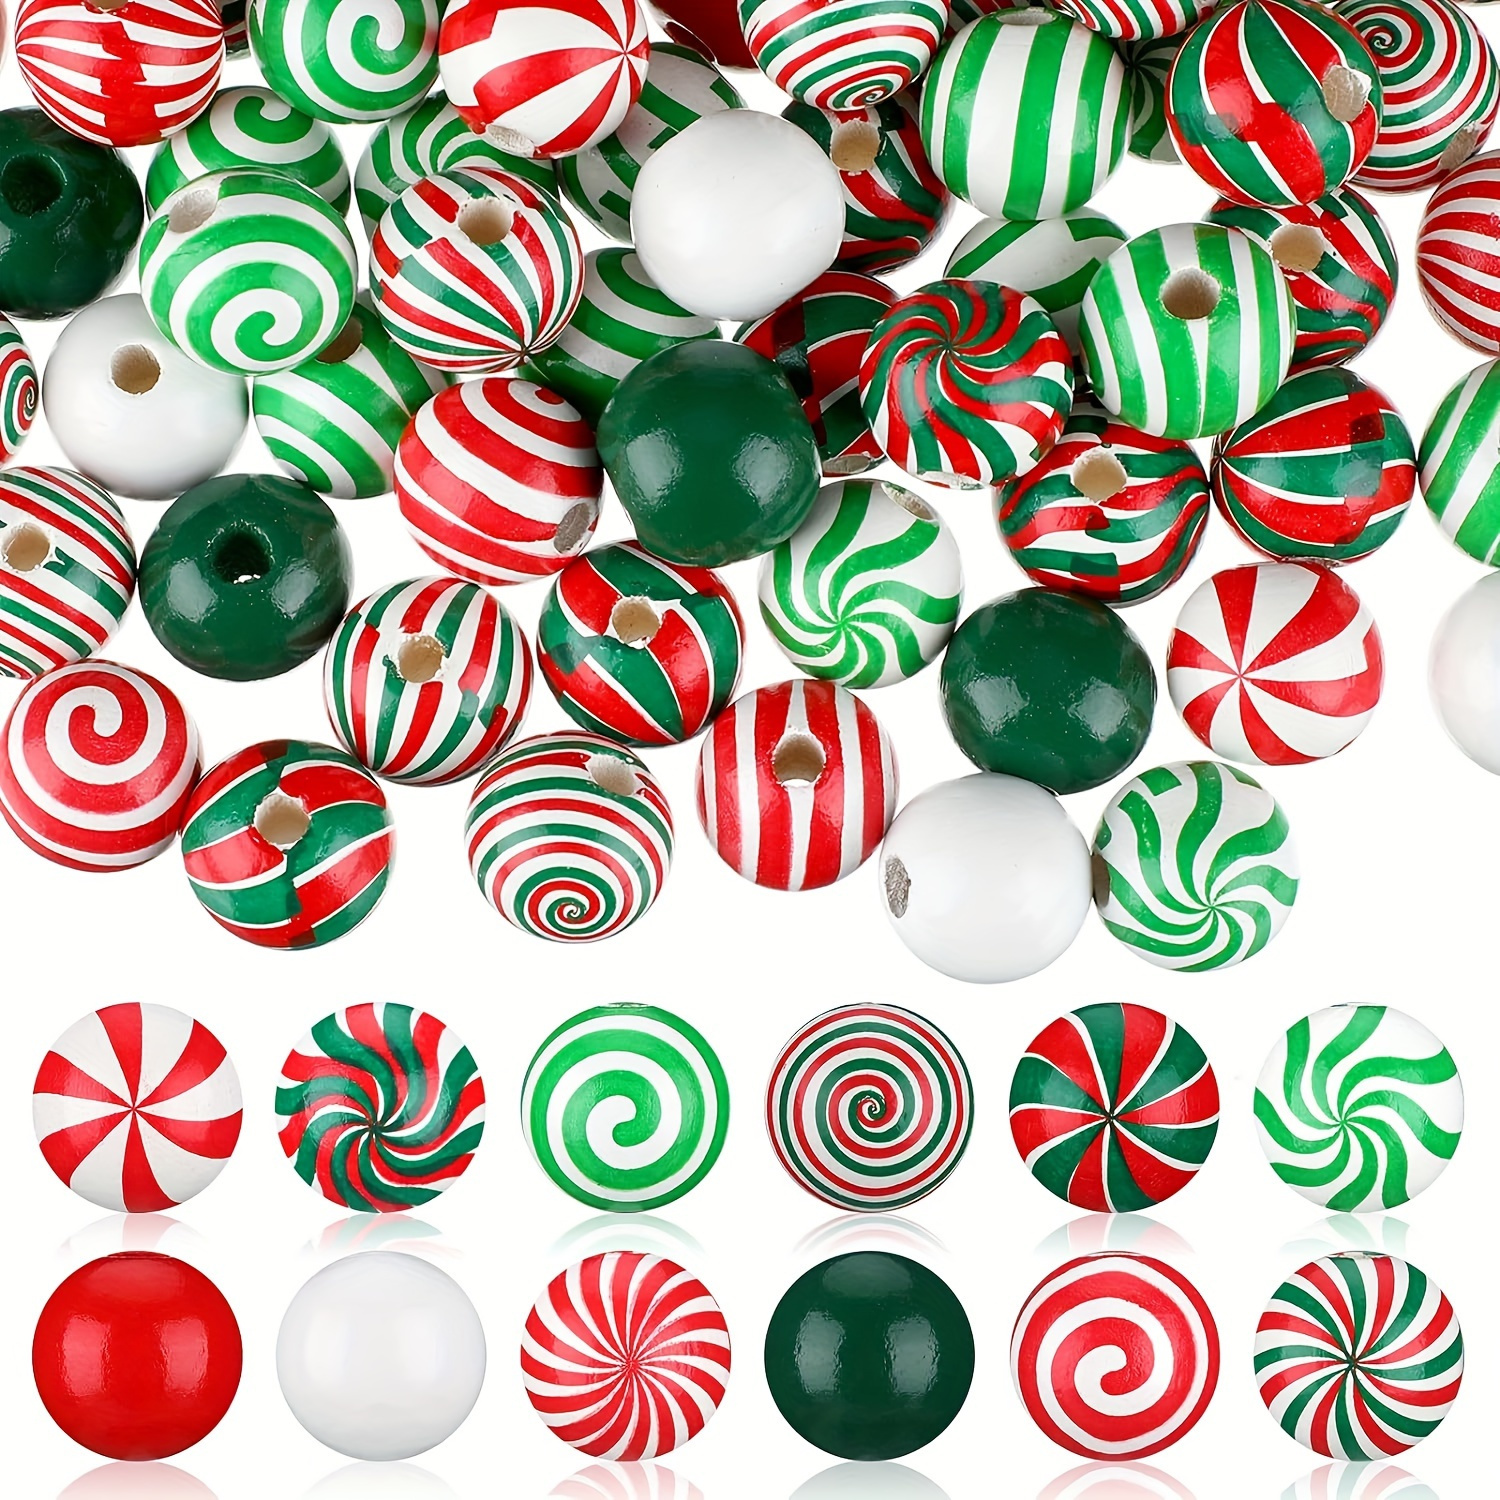 

110-piece Christmas Wooden Beads Set - Red, Green & White Candy Cane Design For Diy Jewelry, Wreaths, Tree Decorations & Holiday Crafts